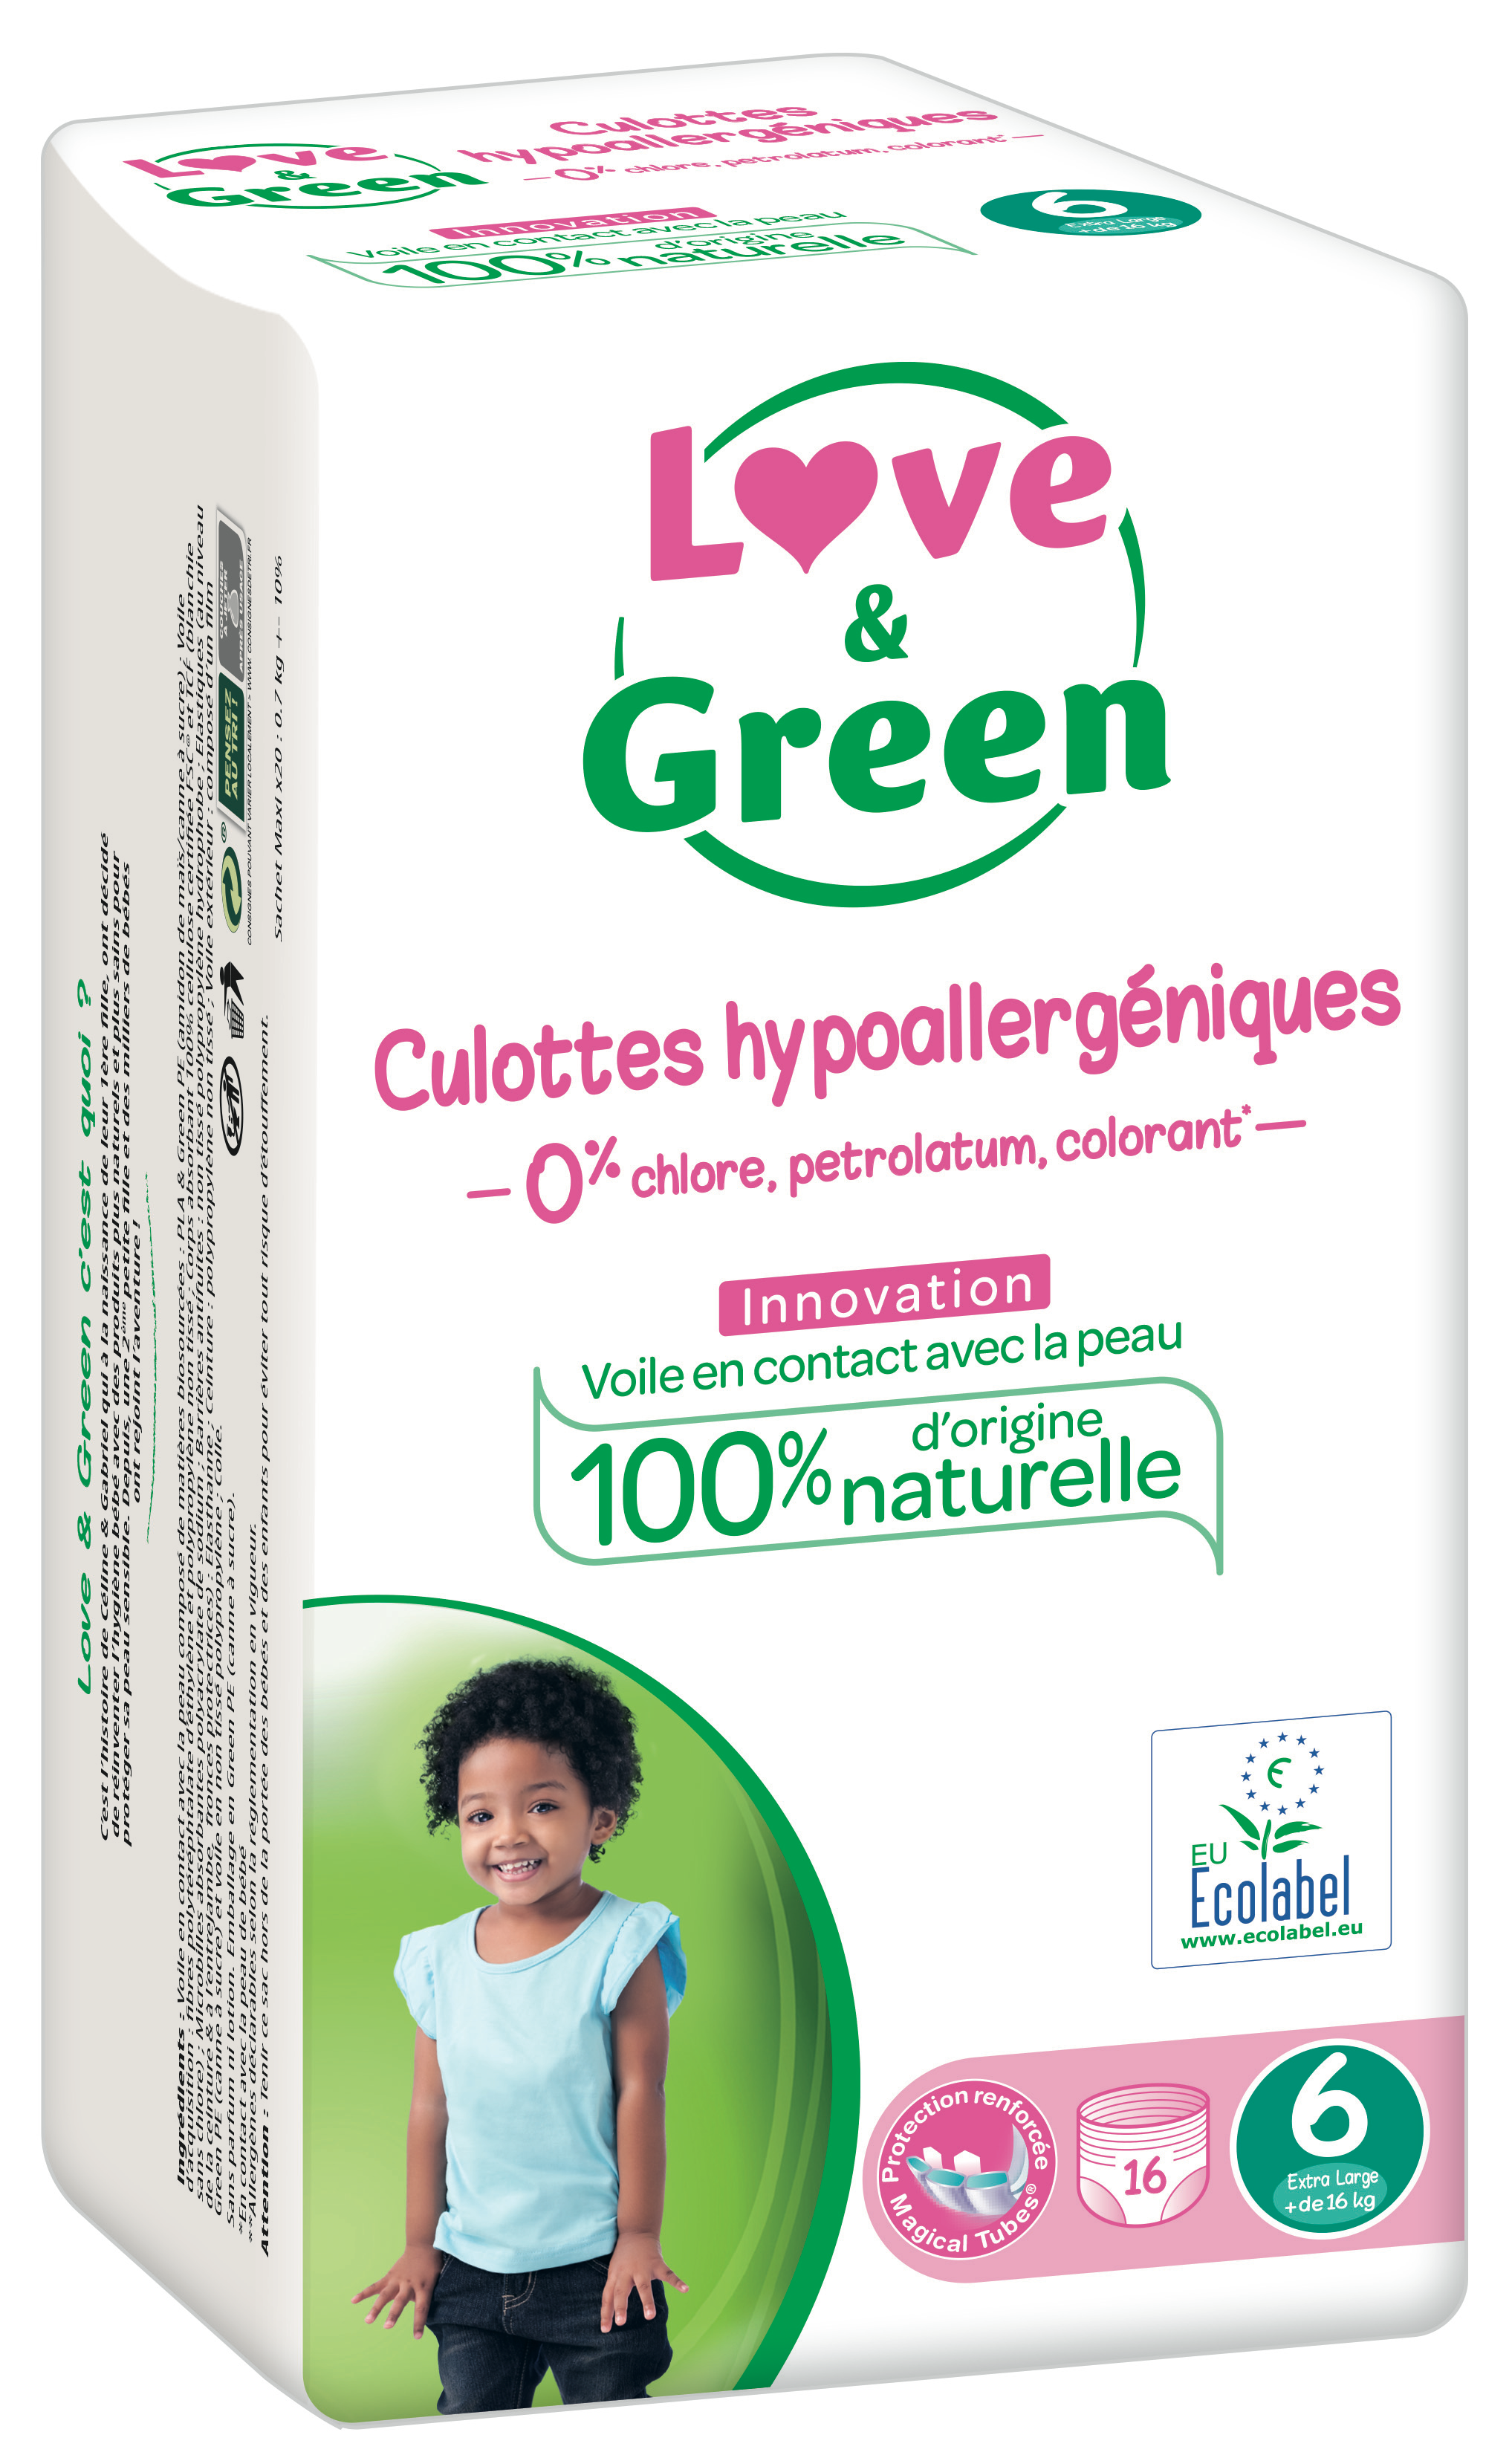 Love & Green - Couches taille 2 - Supermarchés Match